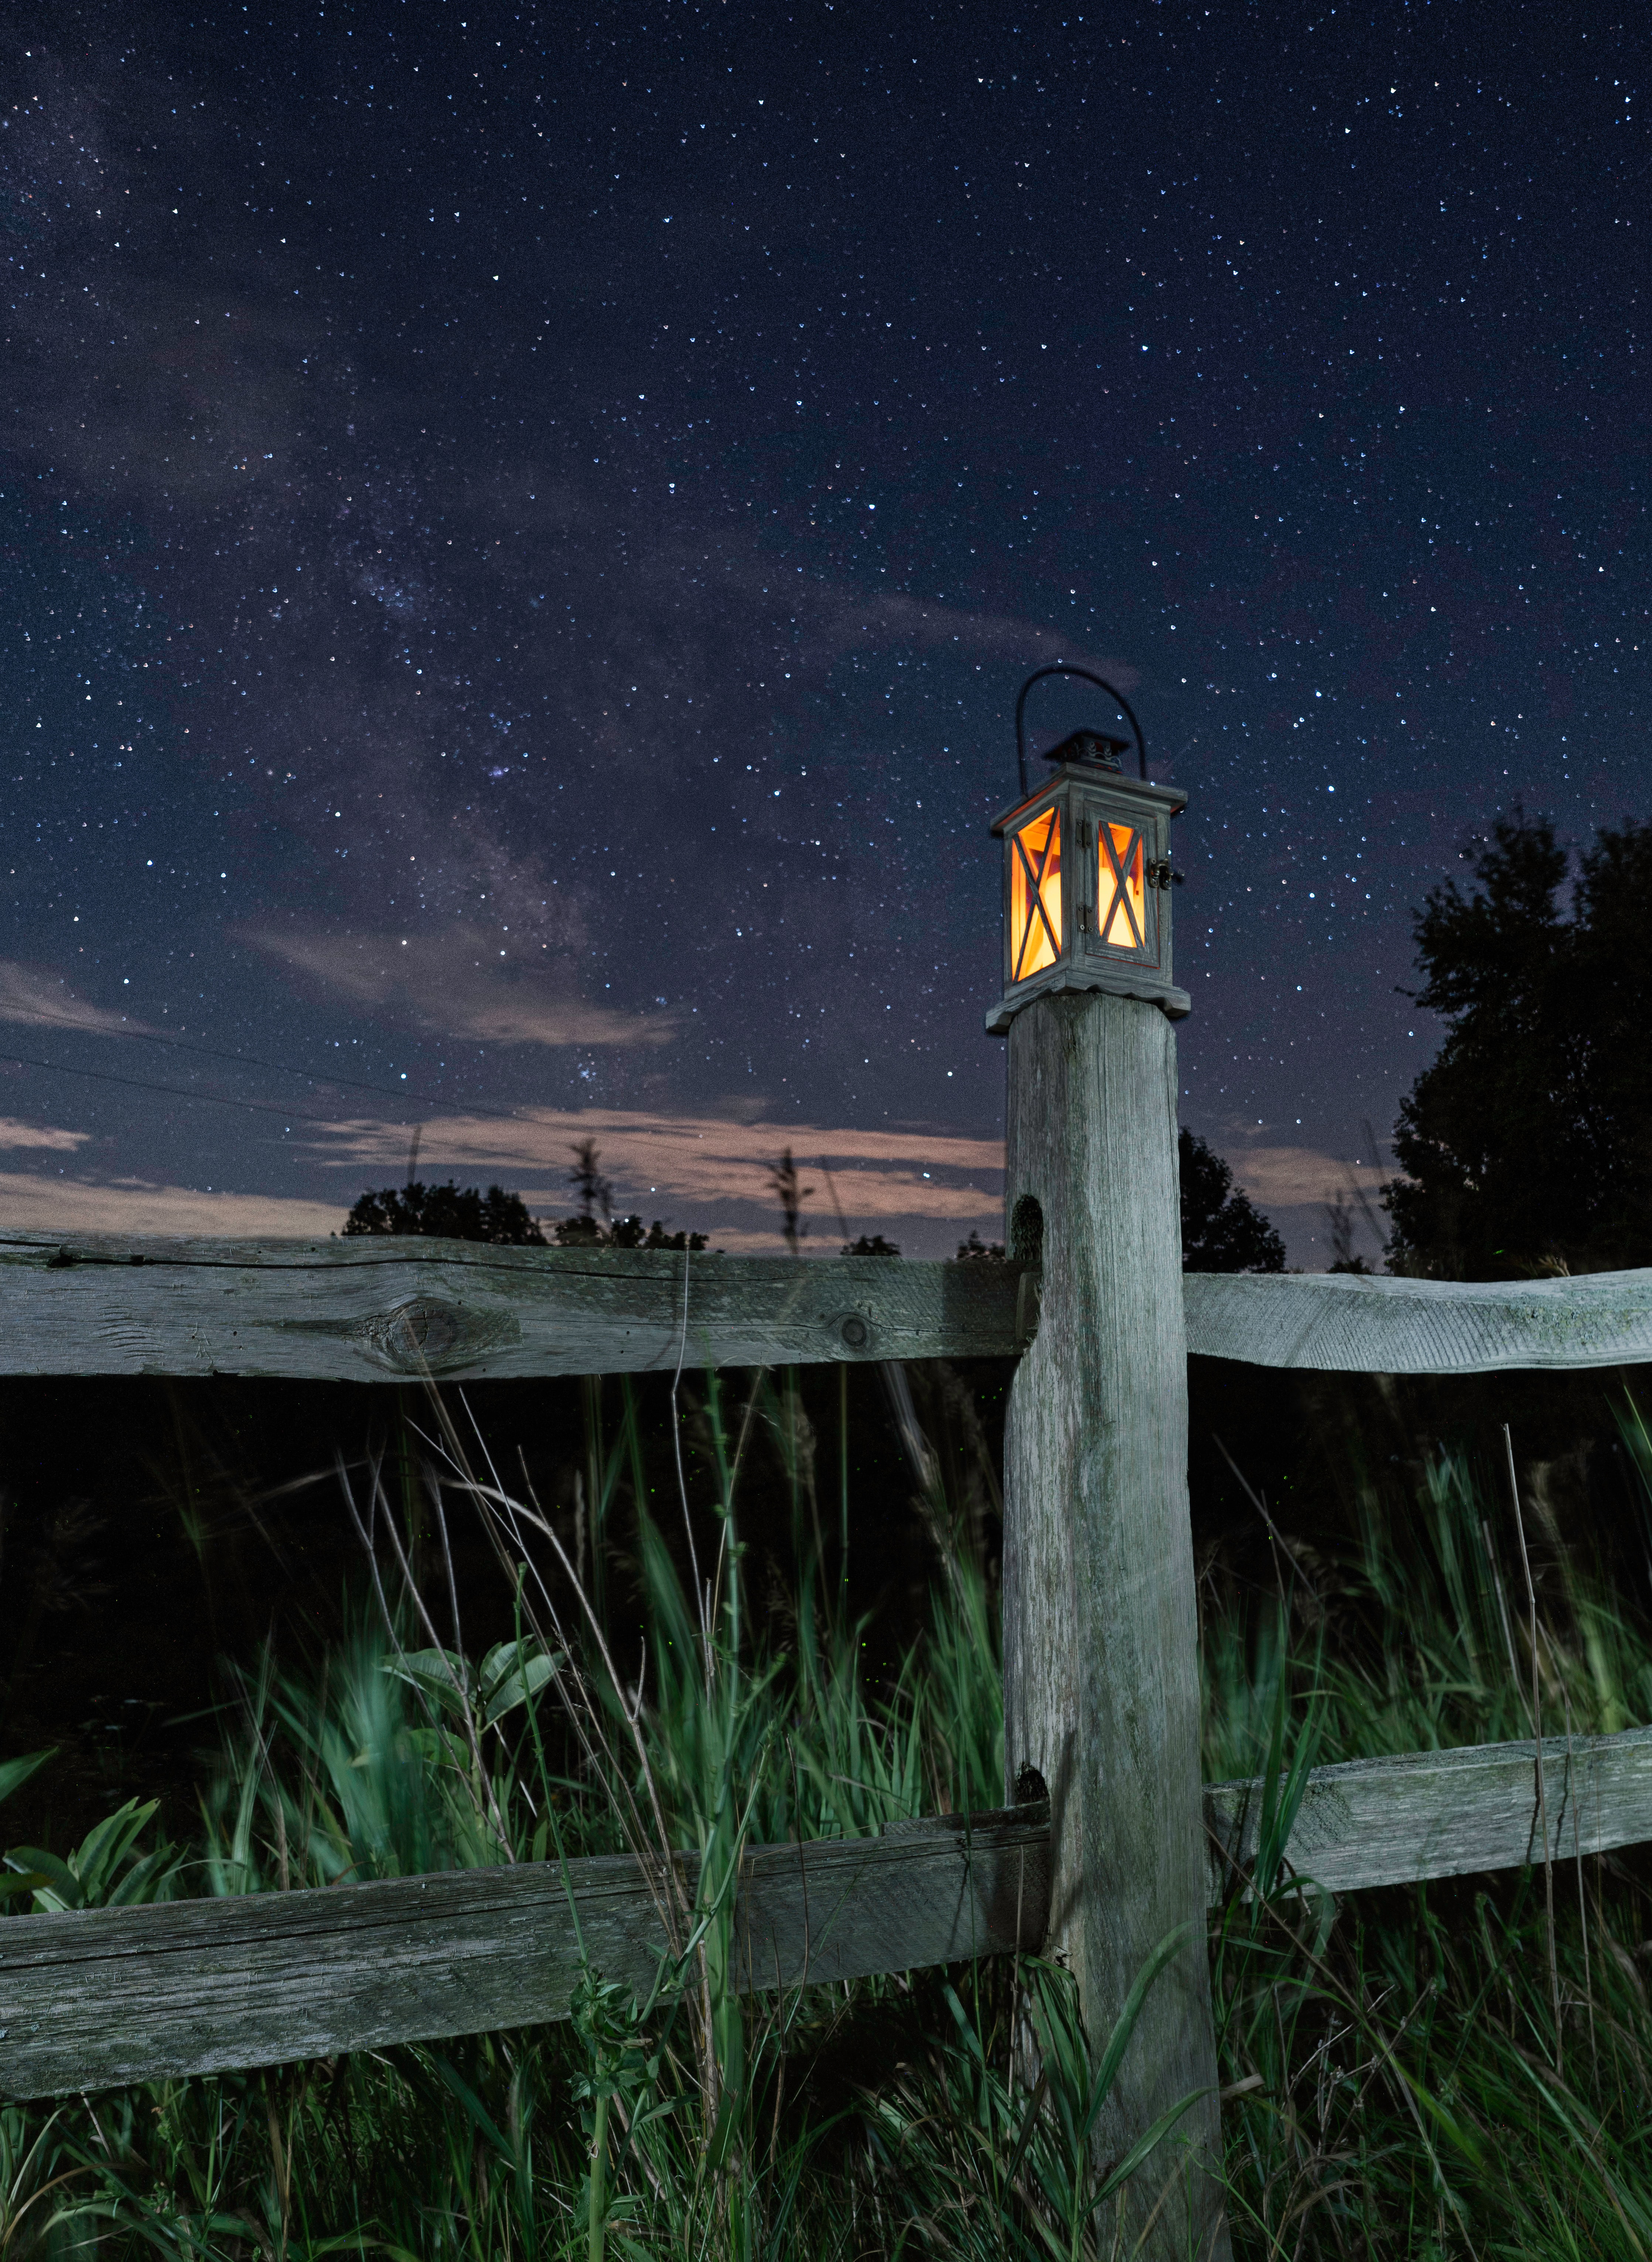 fence, starry sky, miscellanea, sky, lamp, grass, night, miscellaneous, lantern images